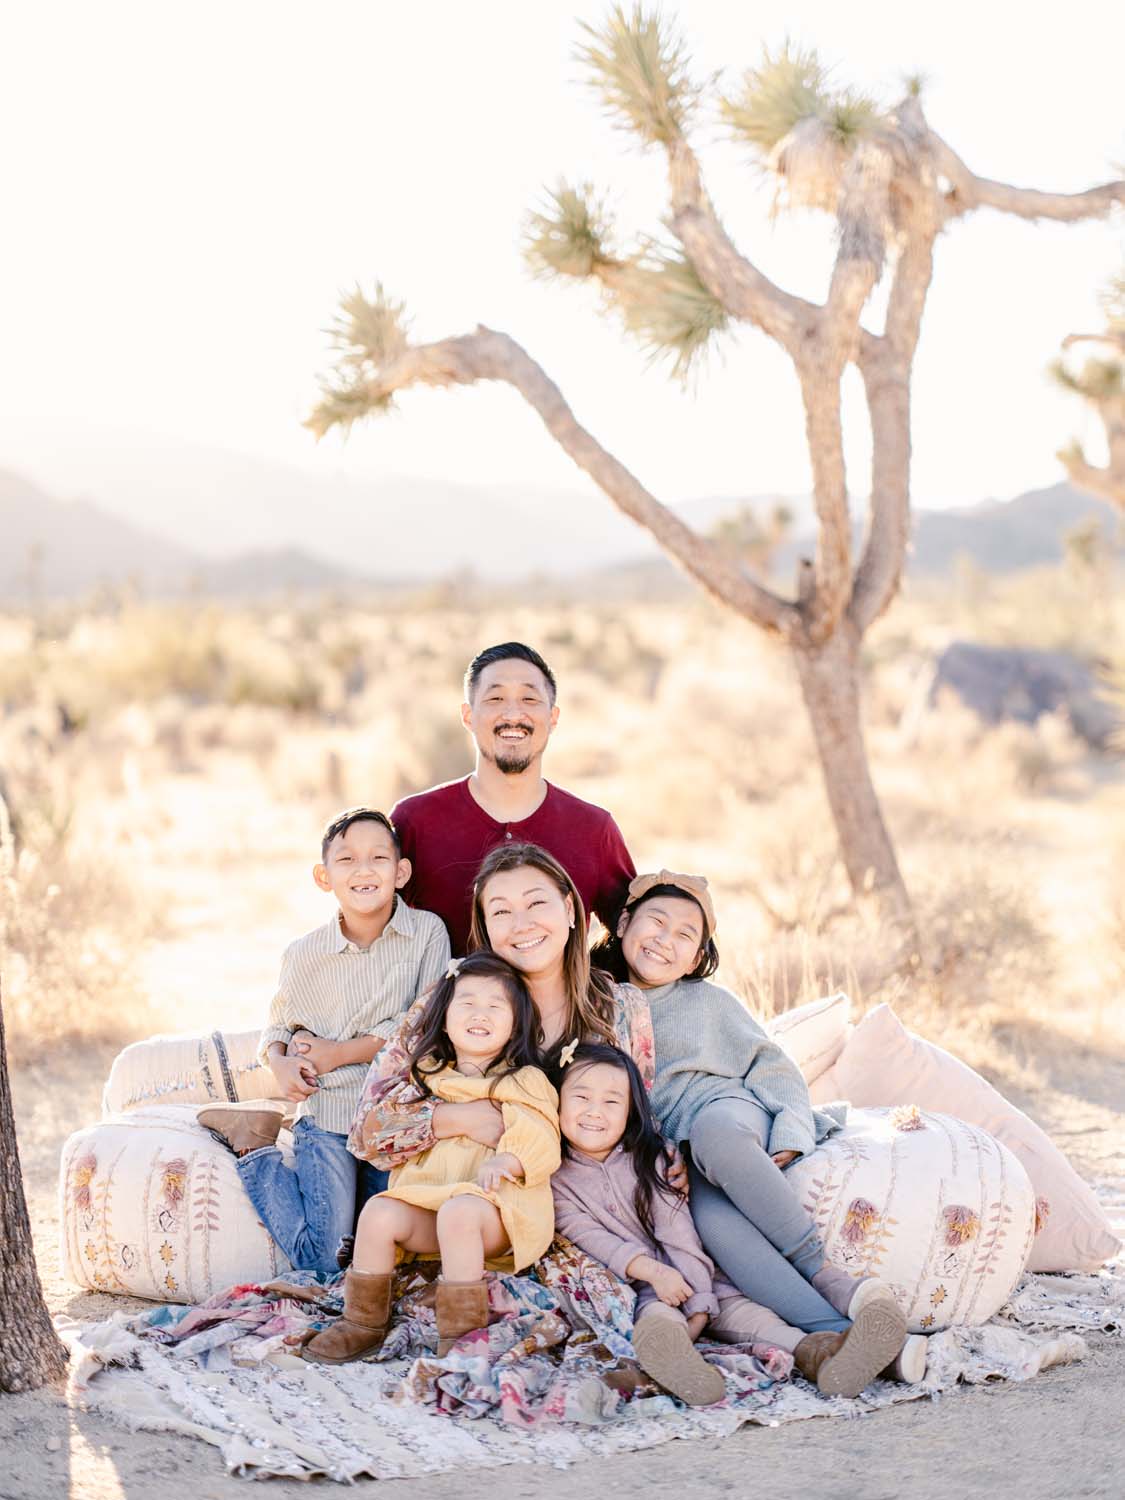 A smiling family of six crowd together, smiling amidst golden sunlight